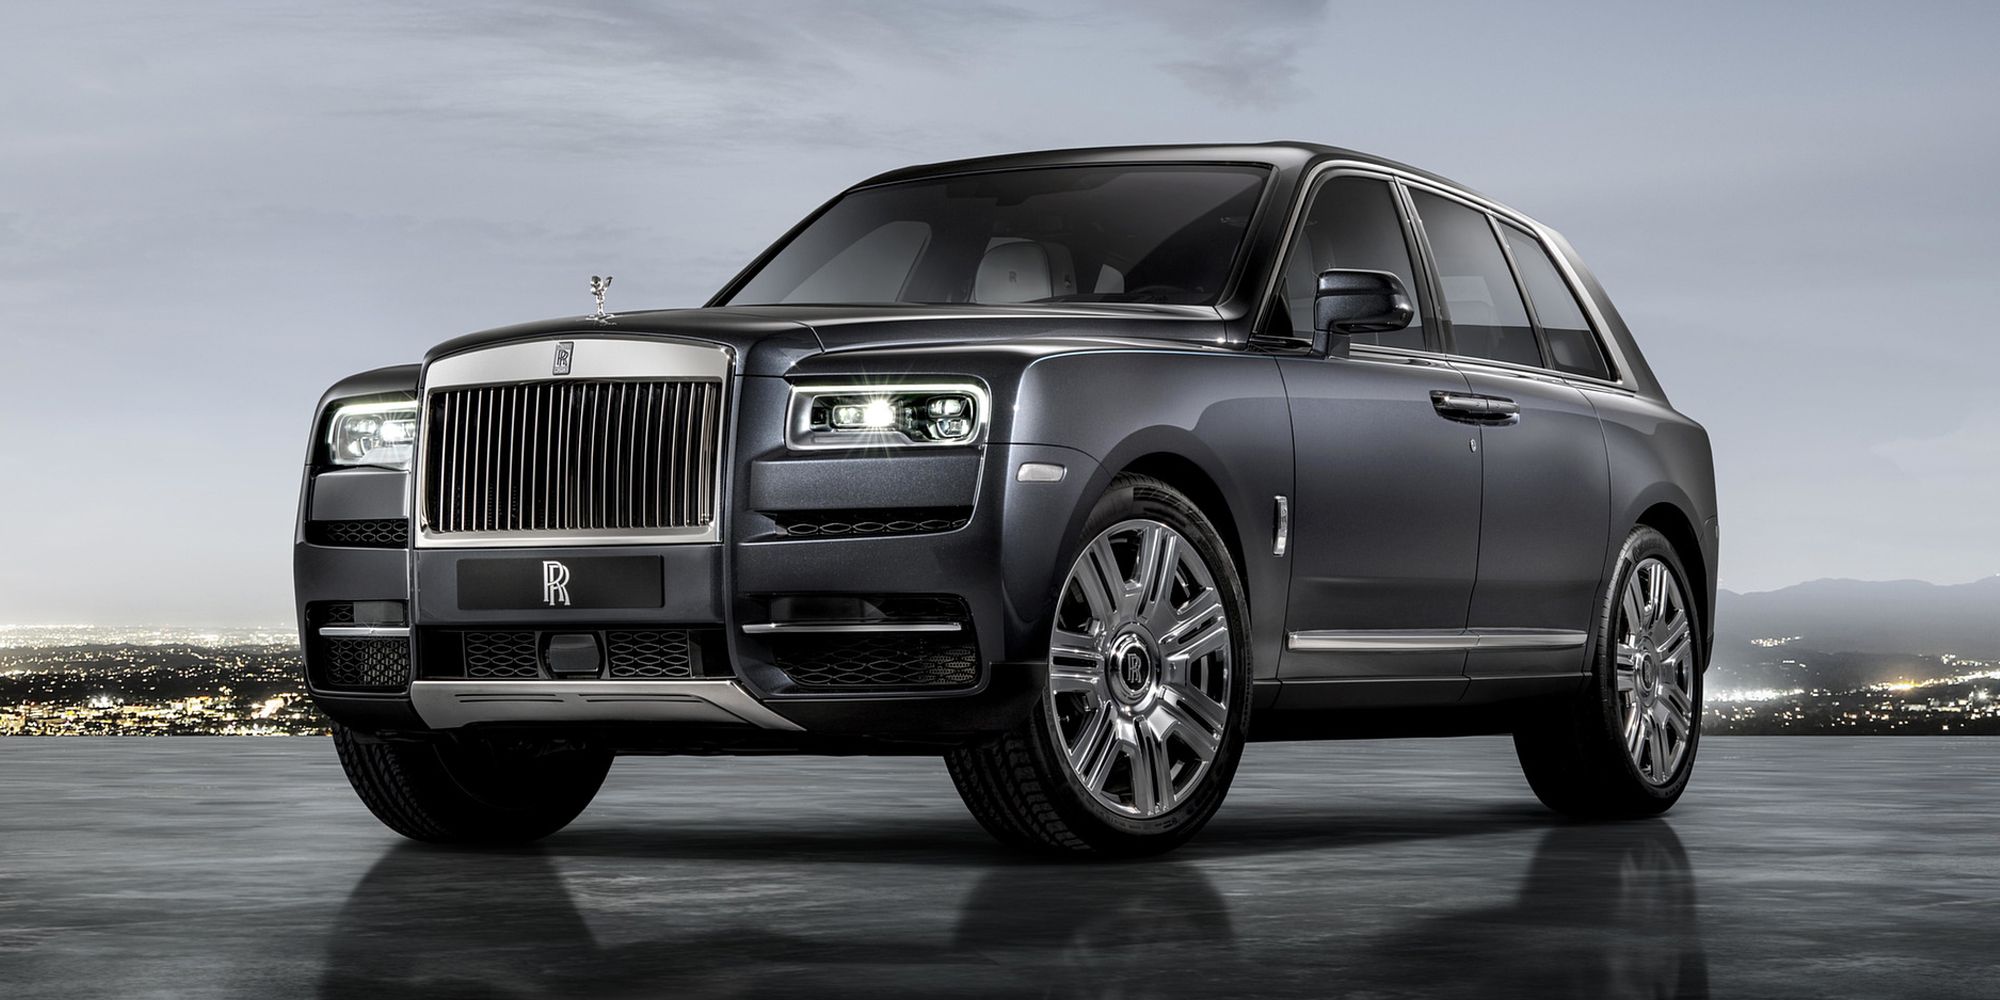 The front of a grey Cullinan